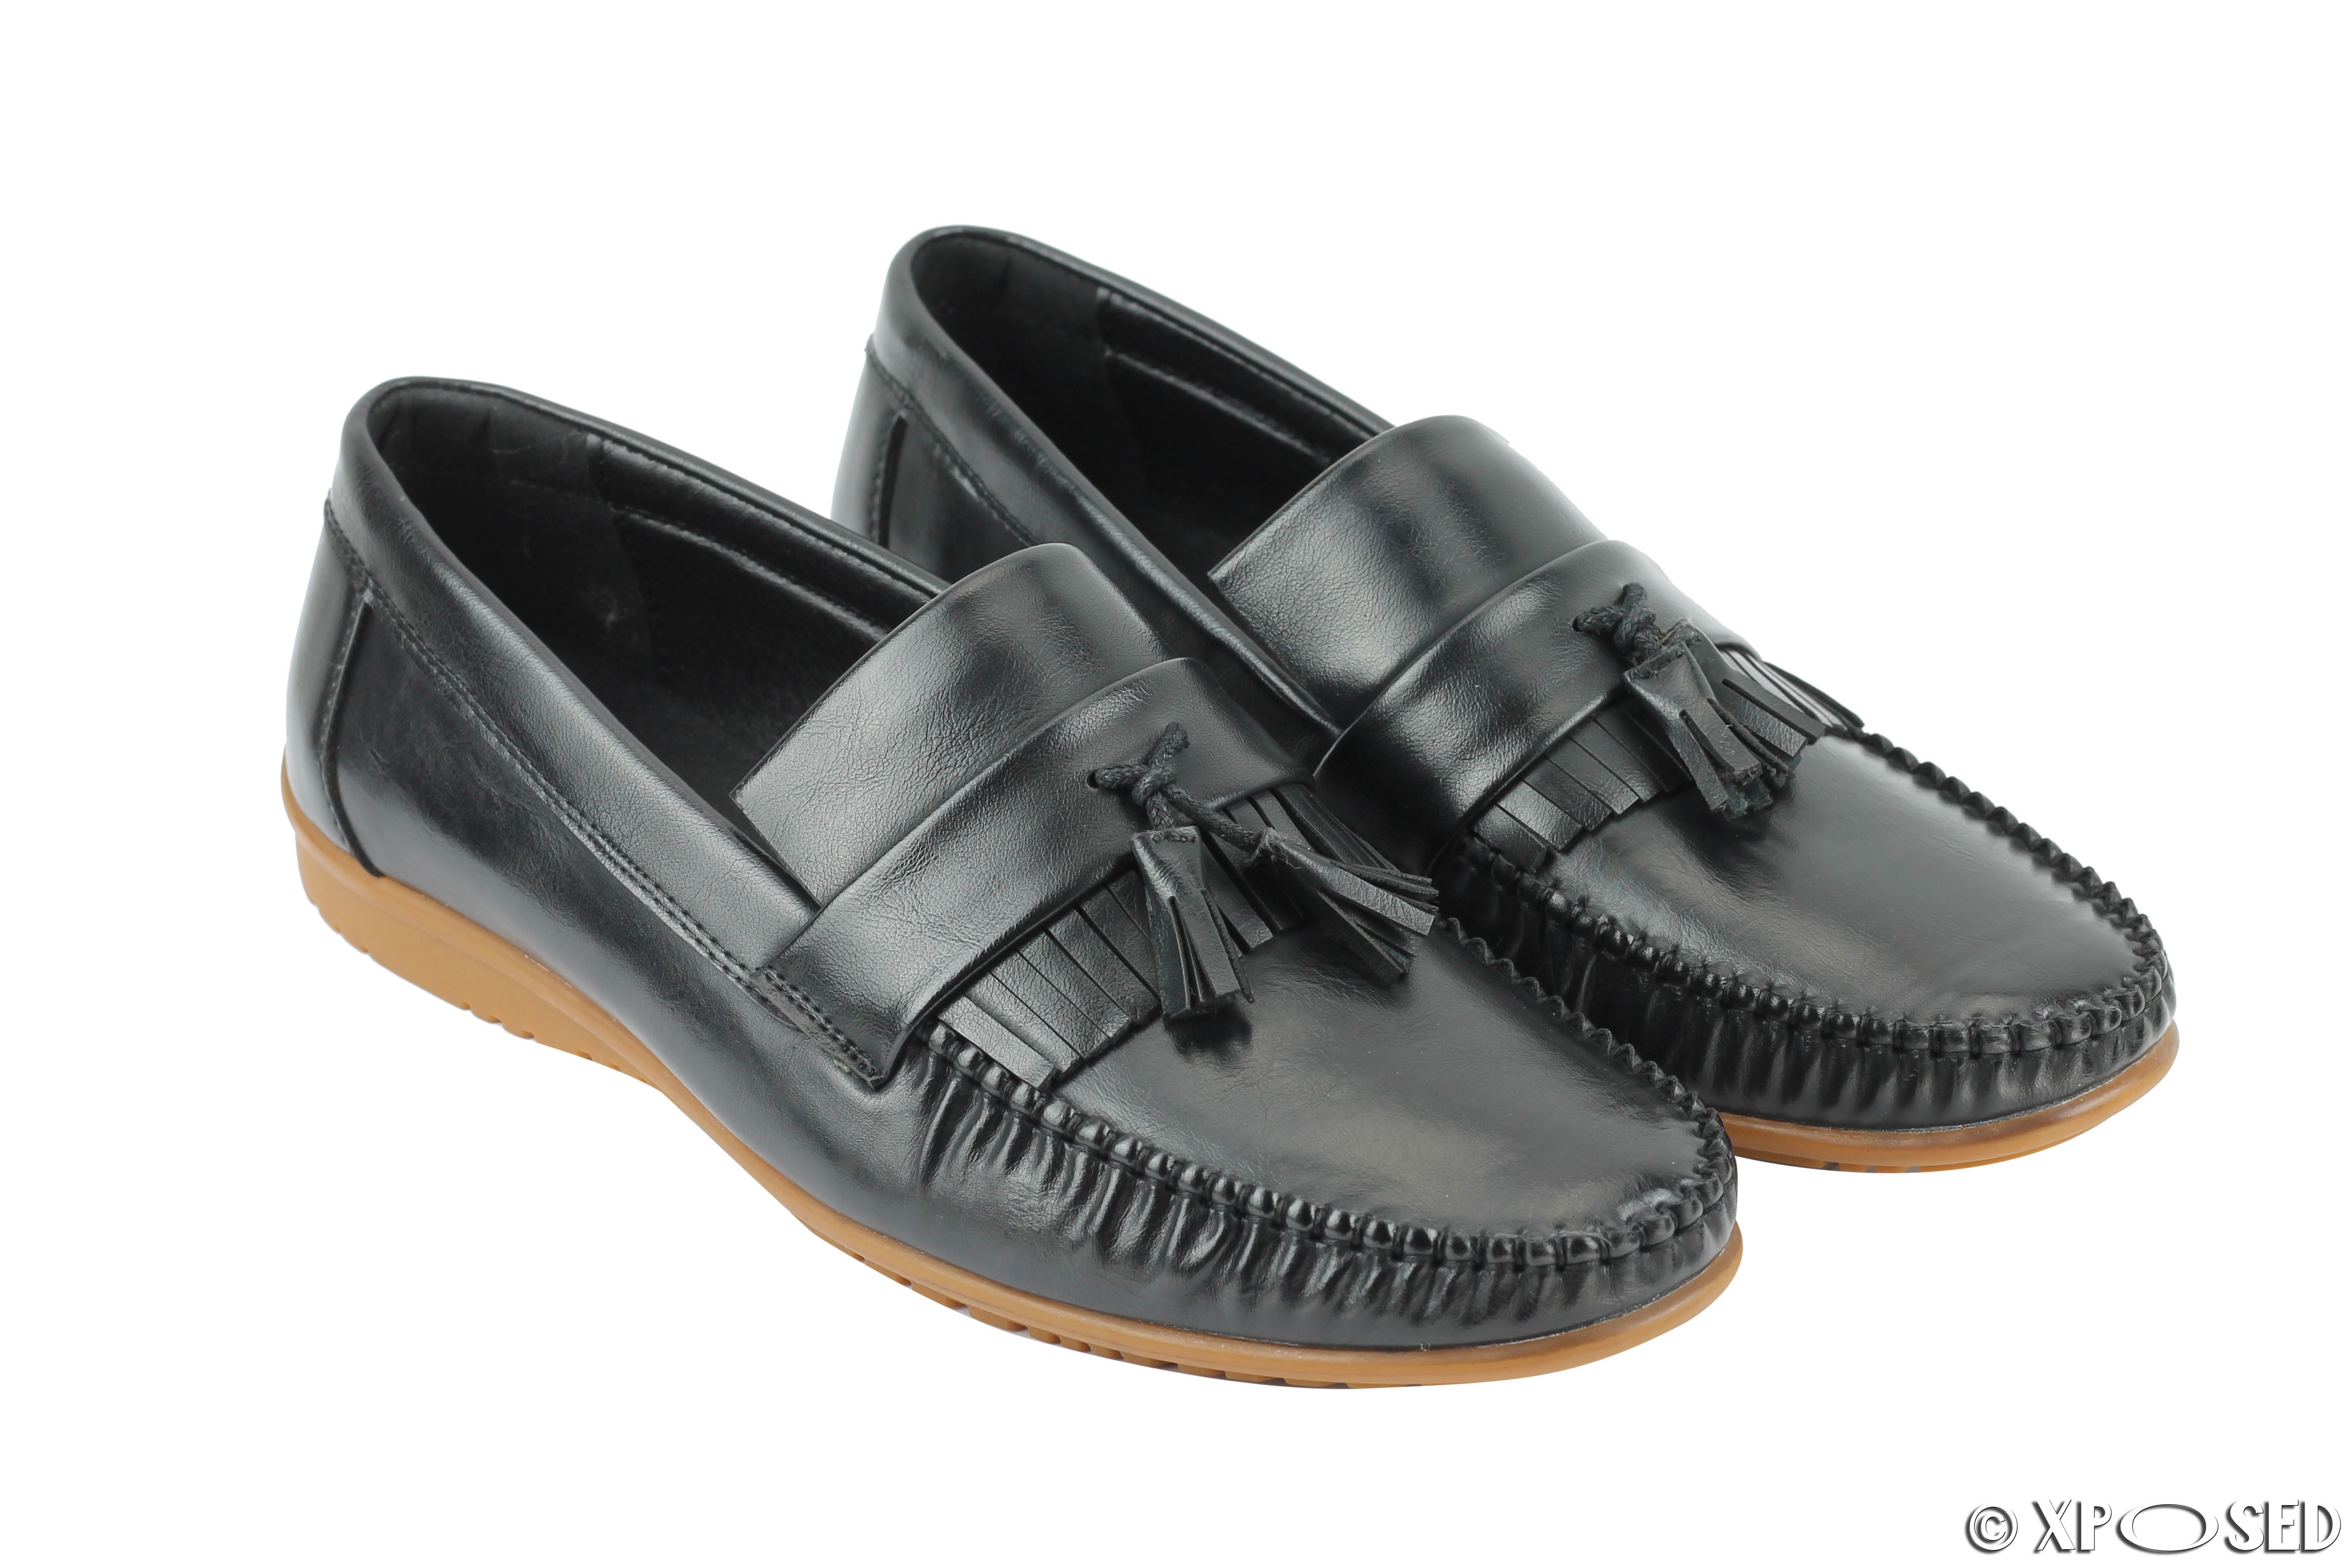 New Mens Faux Leather Tassel Kilted Loafers Casual Moccasin Shoes Black ...